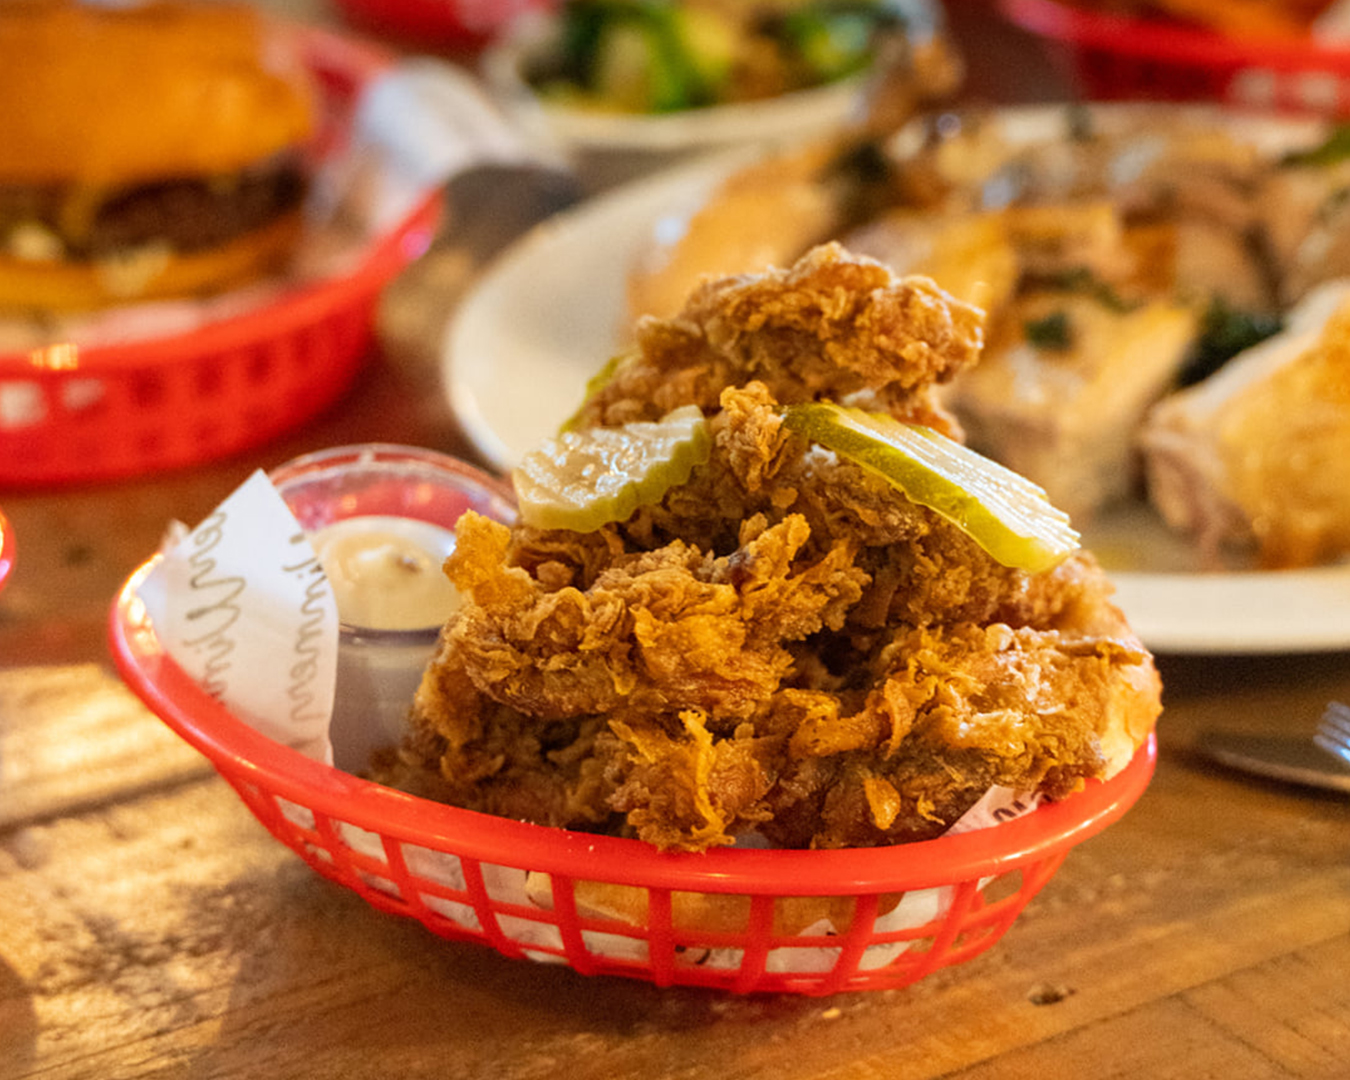 A basket of chicken with pickles on top.